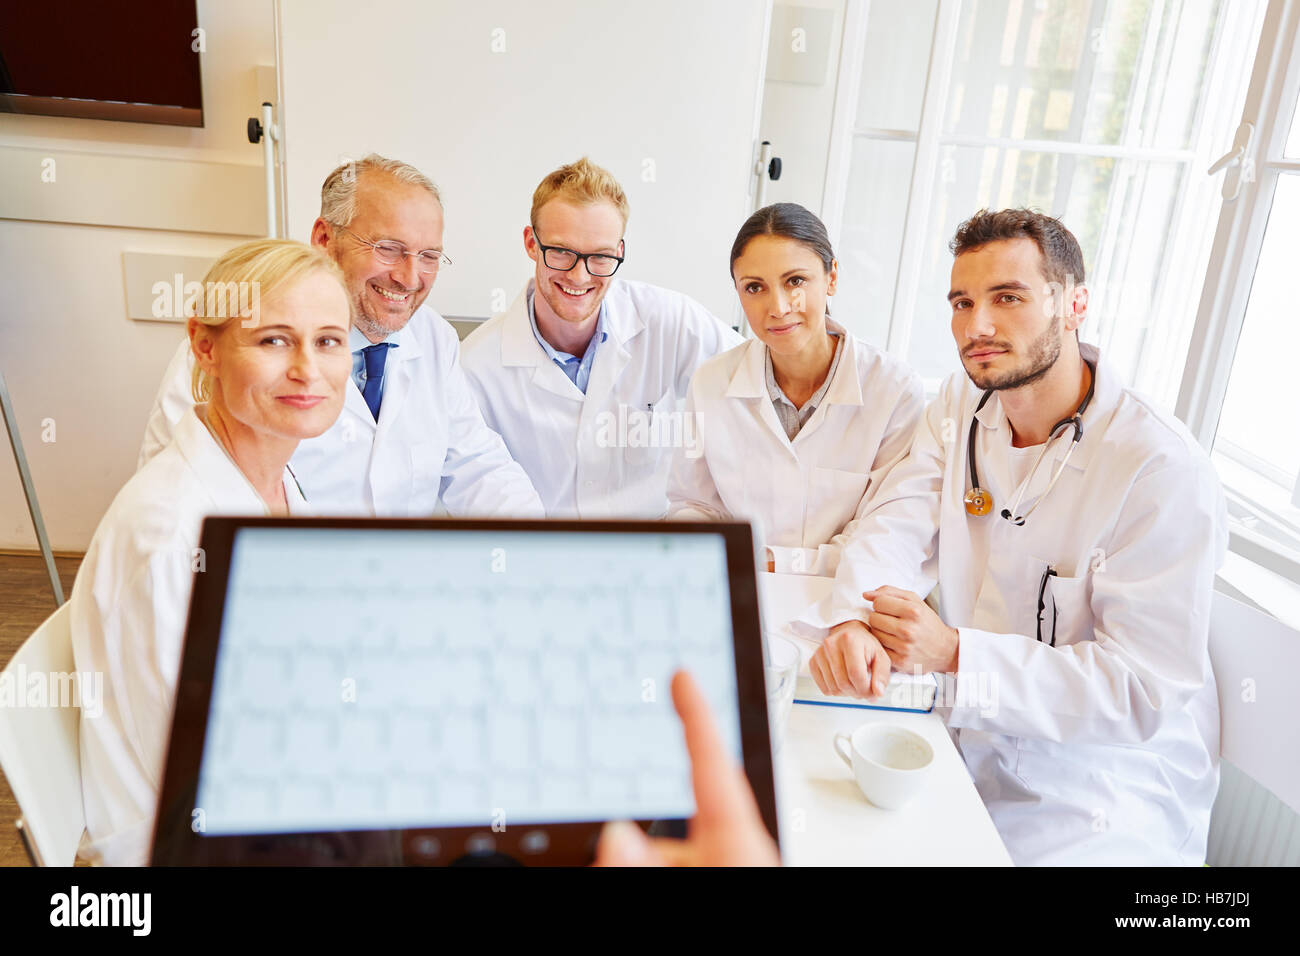 Doctors in ECG training learning about diagnose analysis Stock Photo